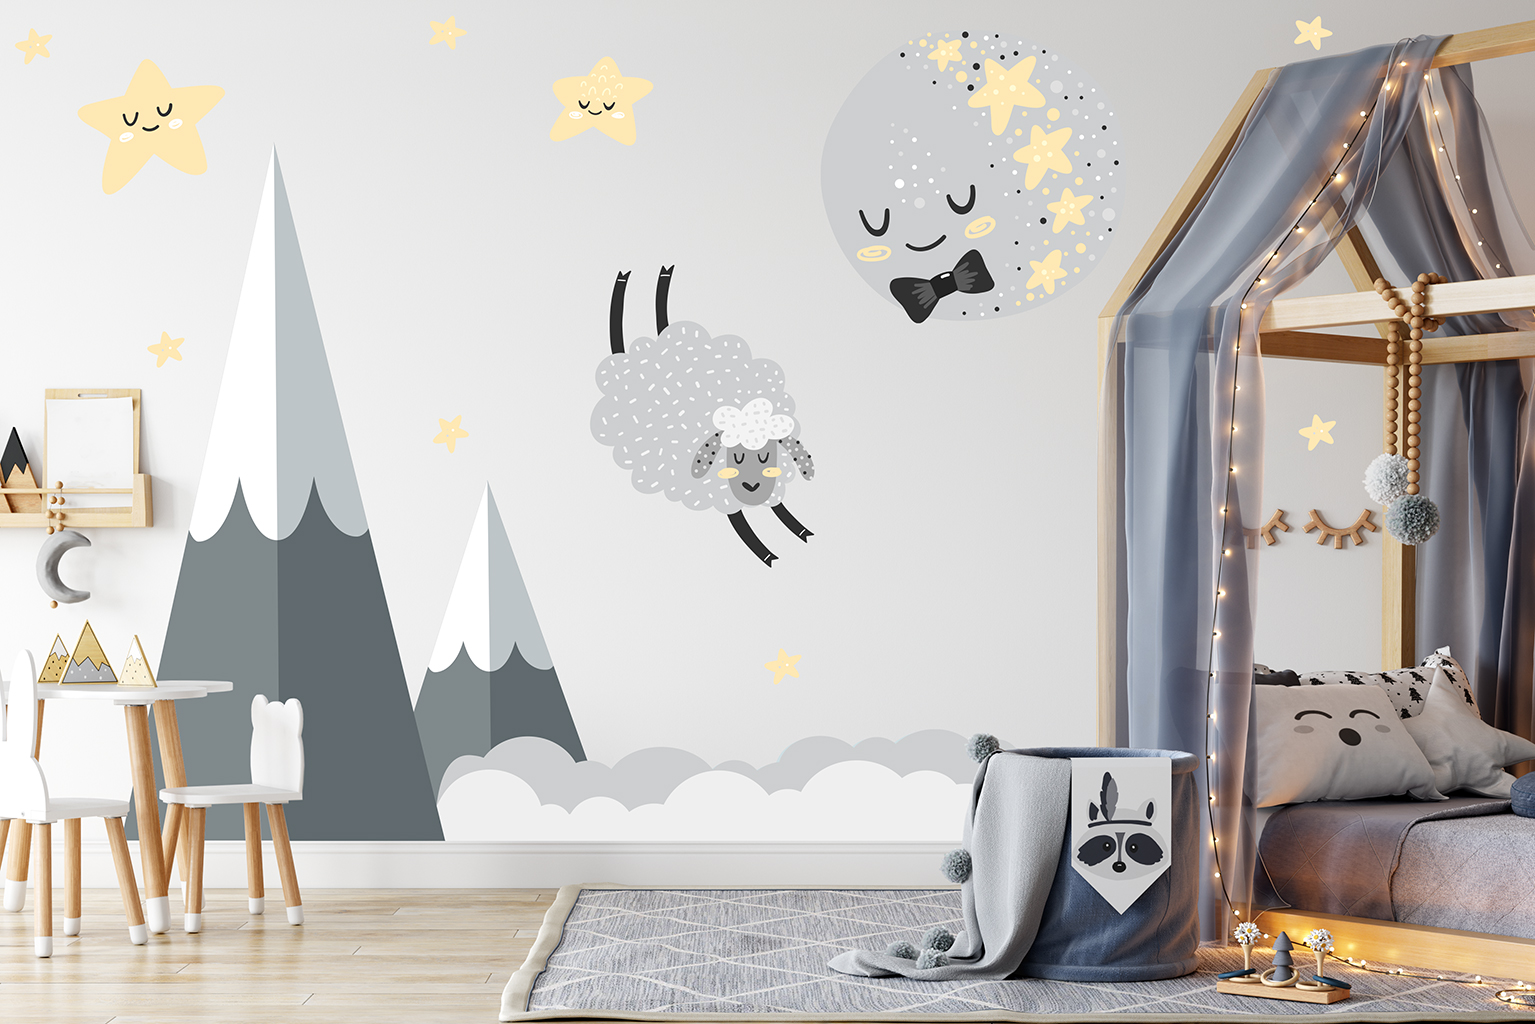 DS109 - Stickers 13 papillons - DECO-VITRES - Sticker mural